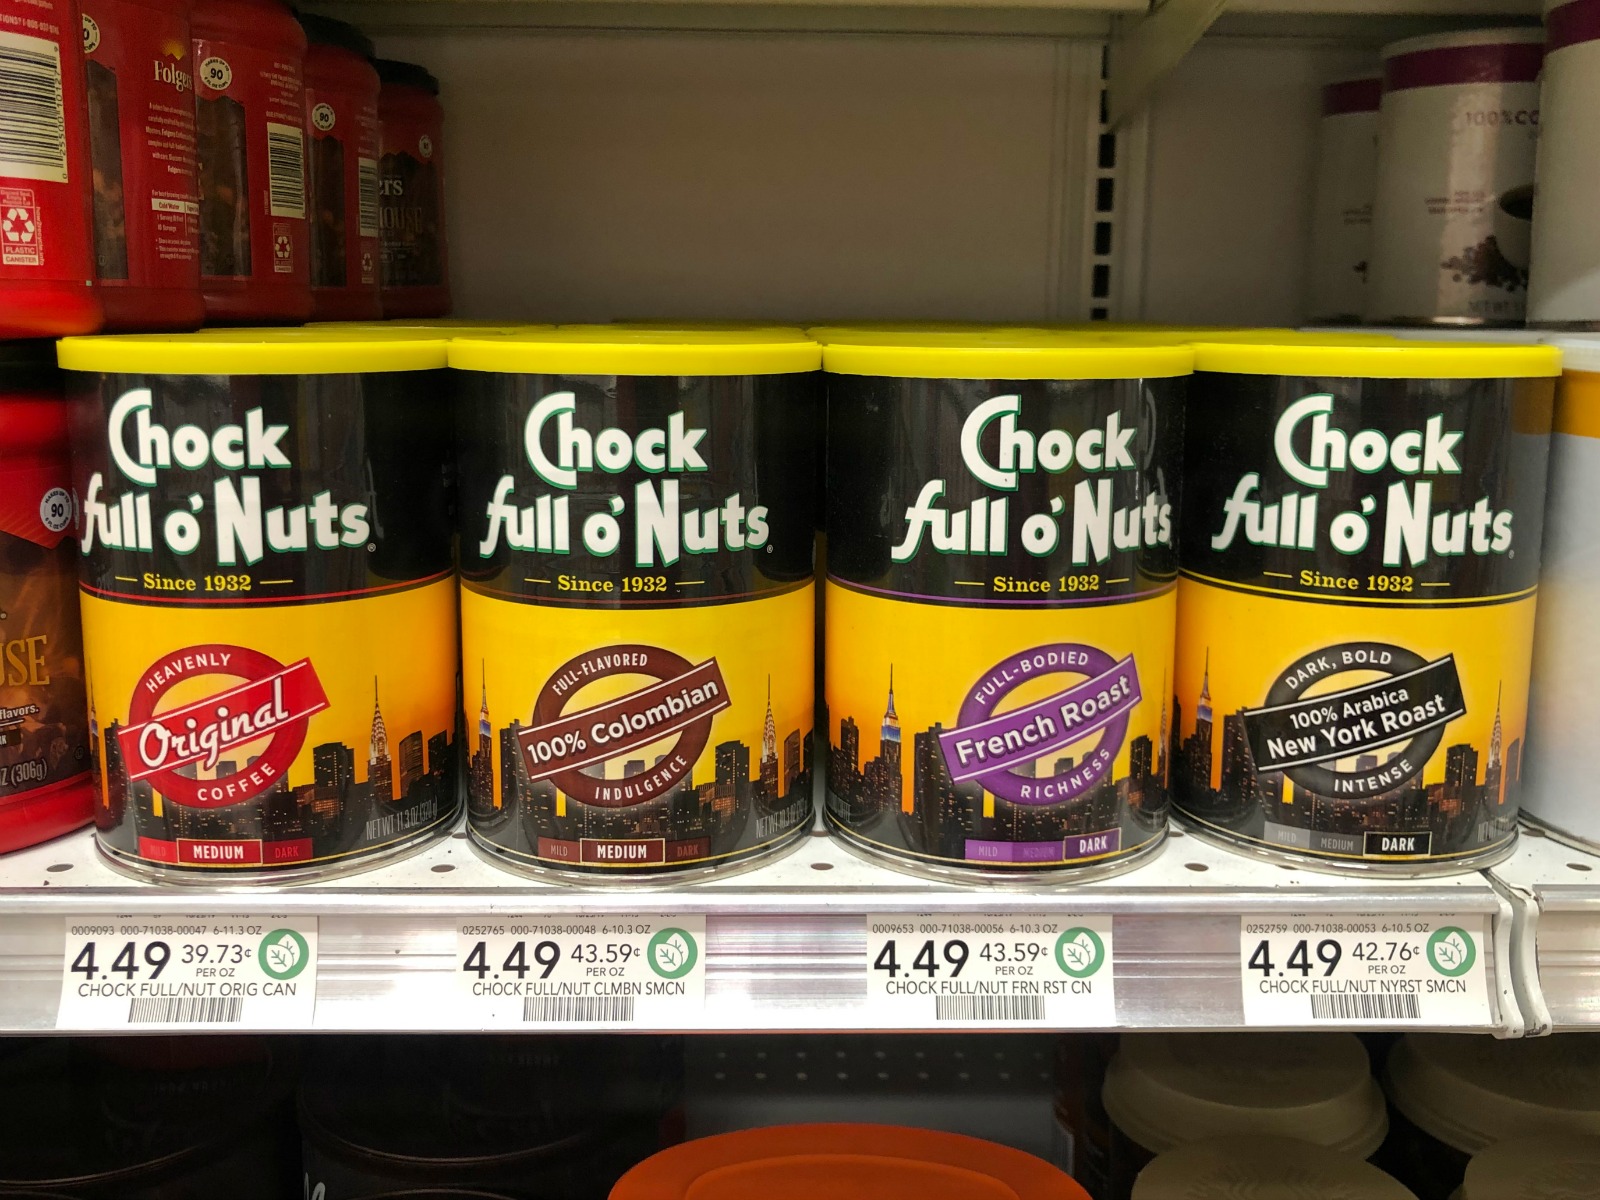 Enjoy The Perfect Cup Of Coffee At A Great Price - Save $2 On Chock full o’ Nuts® At Your Local Publix on I Heart Publix 1